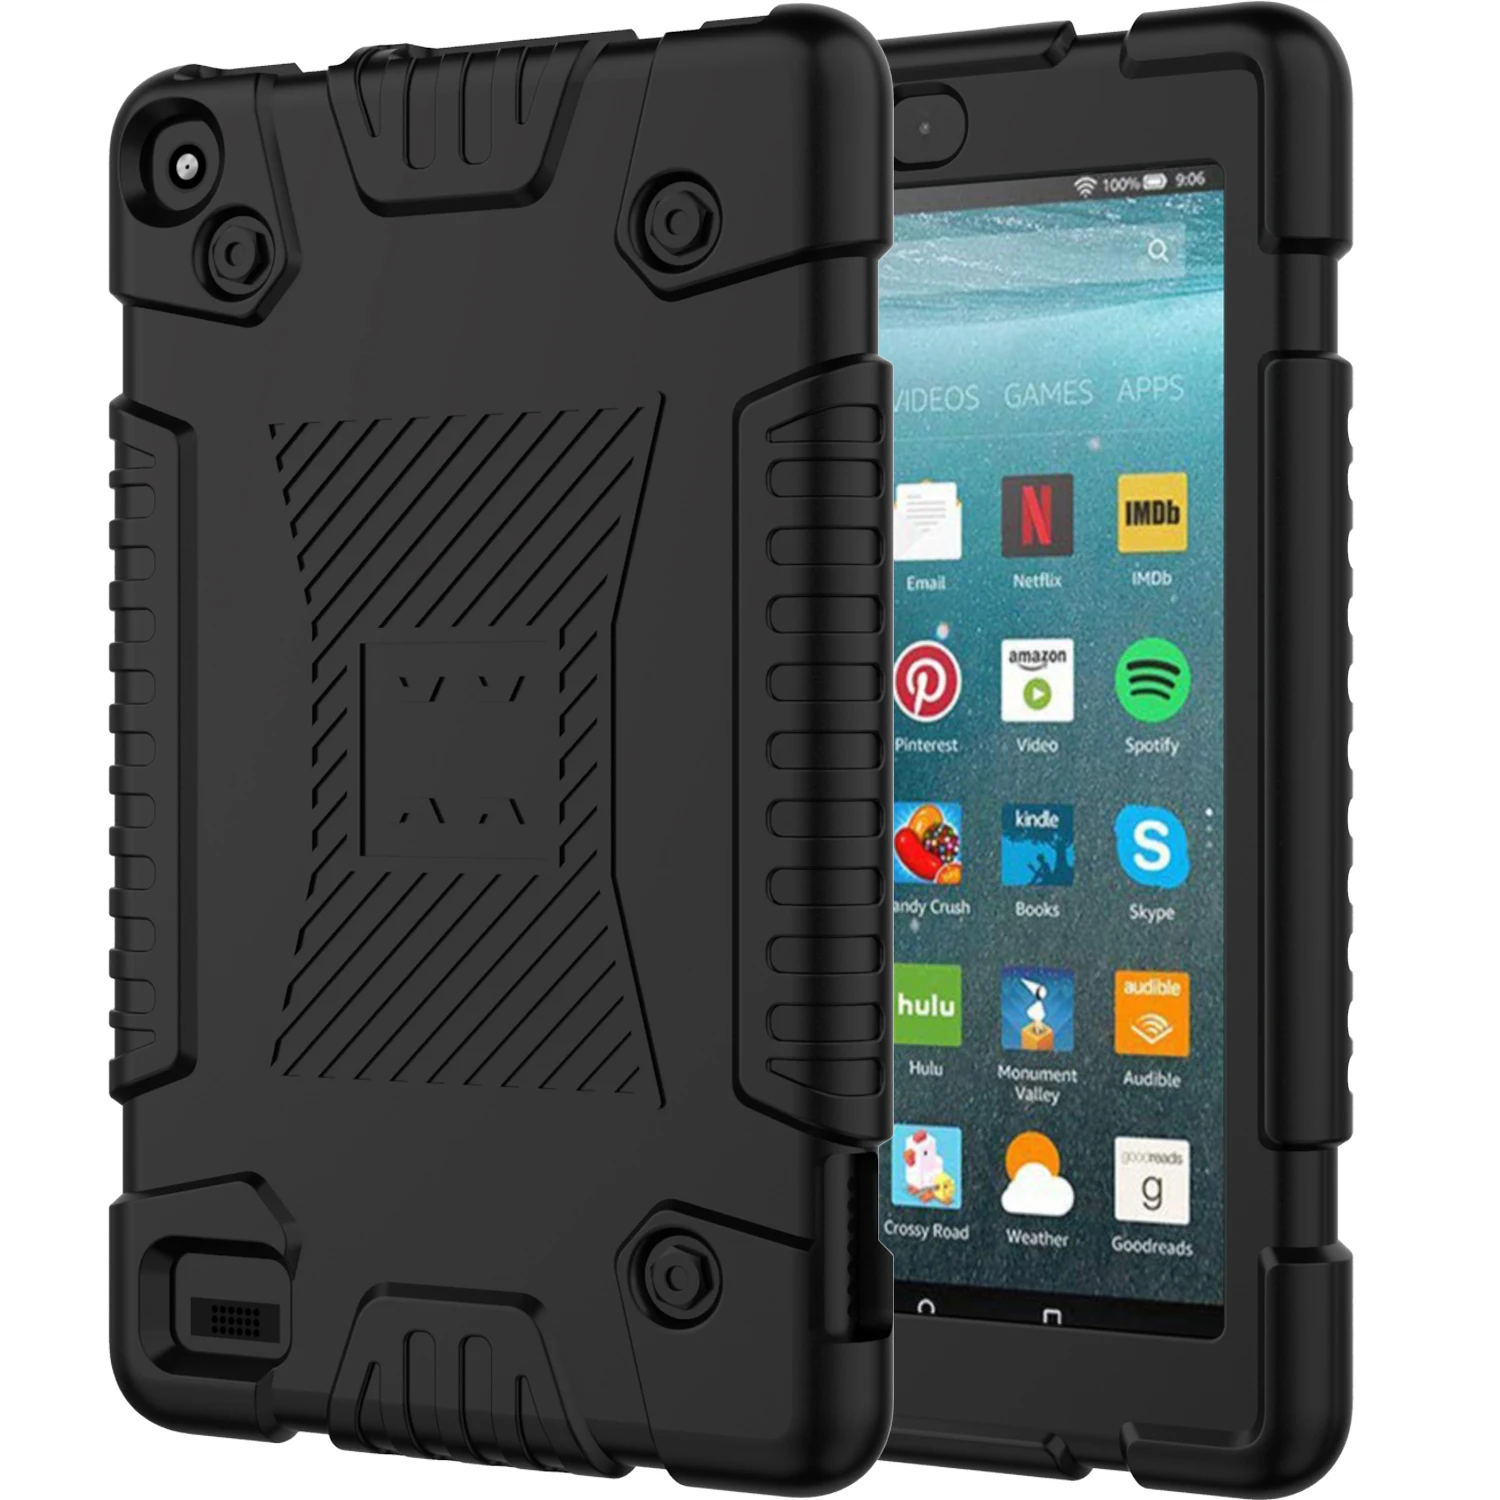 

Heavy Anti Drop Shockproof Non Slip Rugged Soft Tablet Silicone Cover Case For Amazon Kindle Fire 7 2019, Multiple colors